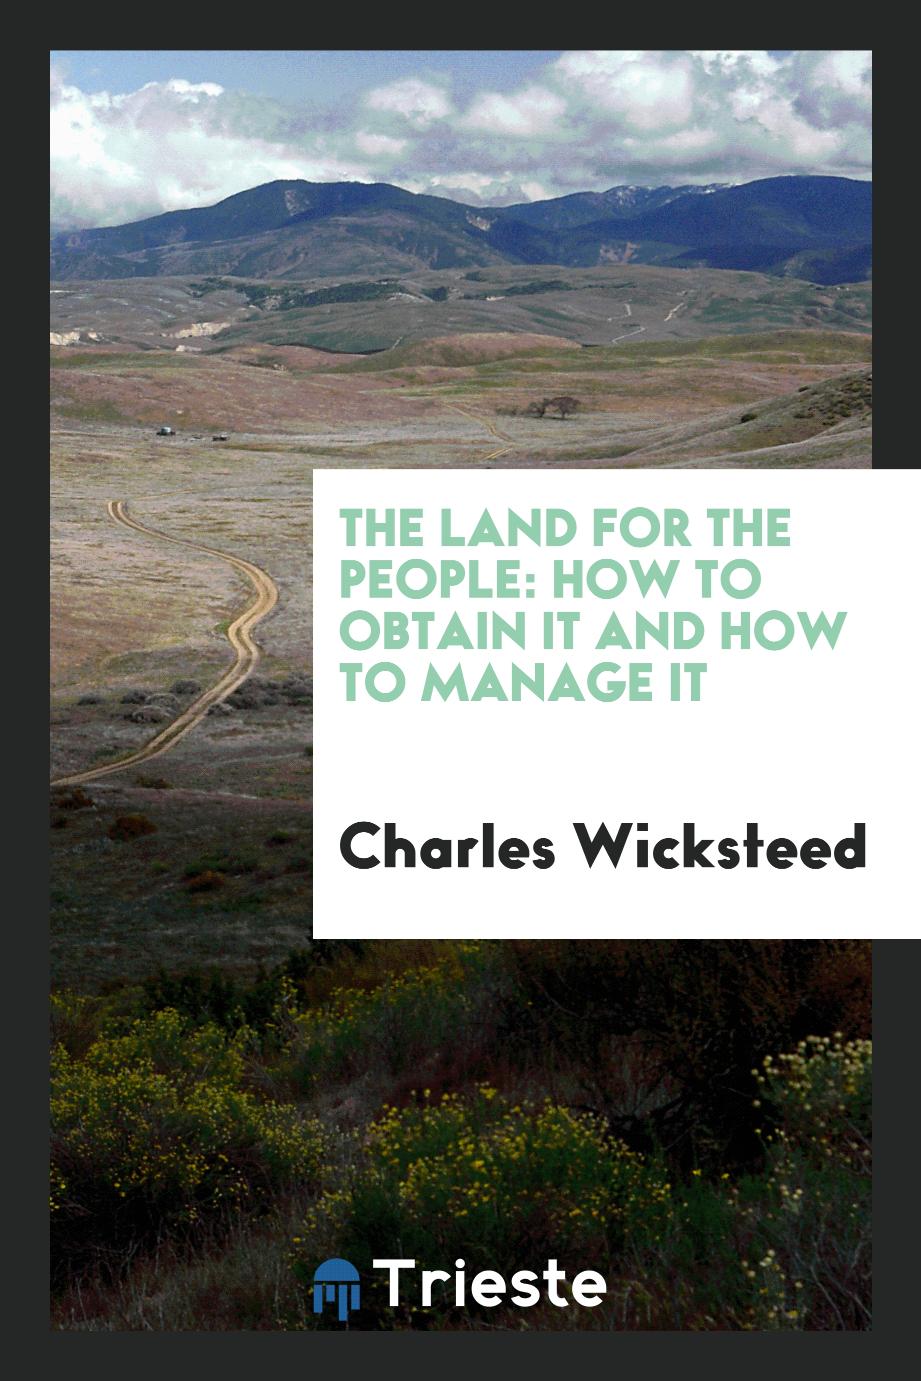 The Land for the People: How to Obtain It and How to Manage It